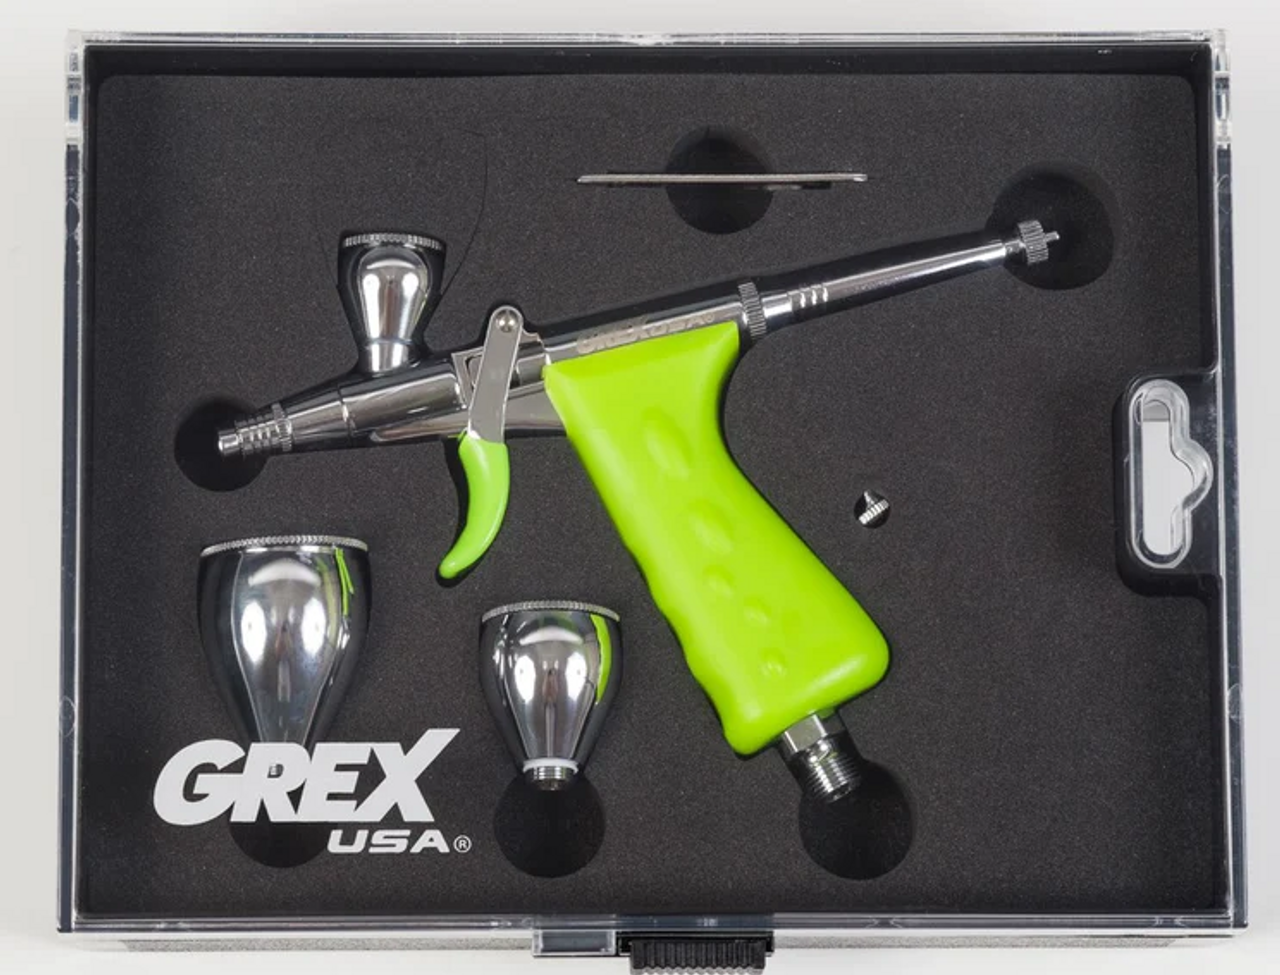 Grex Tritium.TS3 Double Action Pistol Style Trigger Side Feed Airbrush, 0.3mm Nozzle